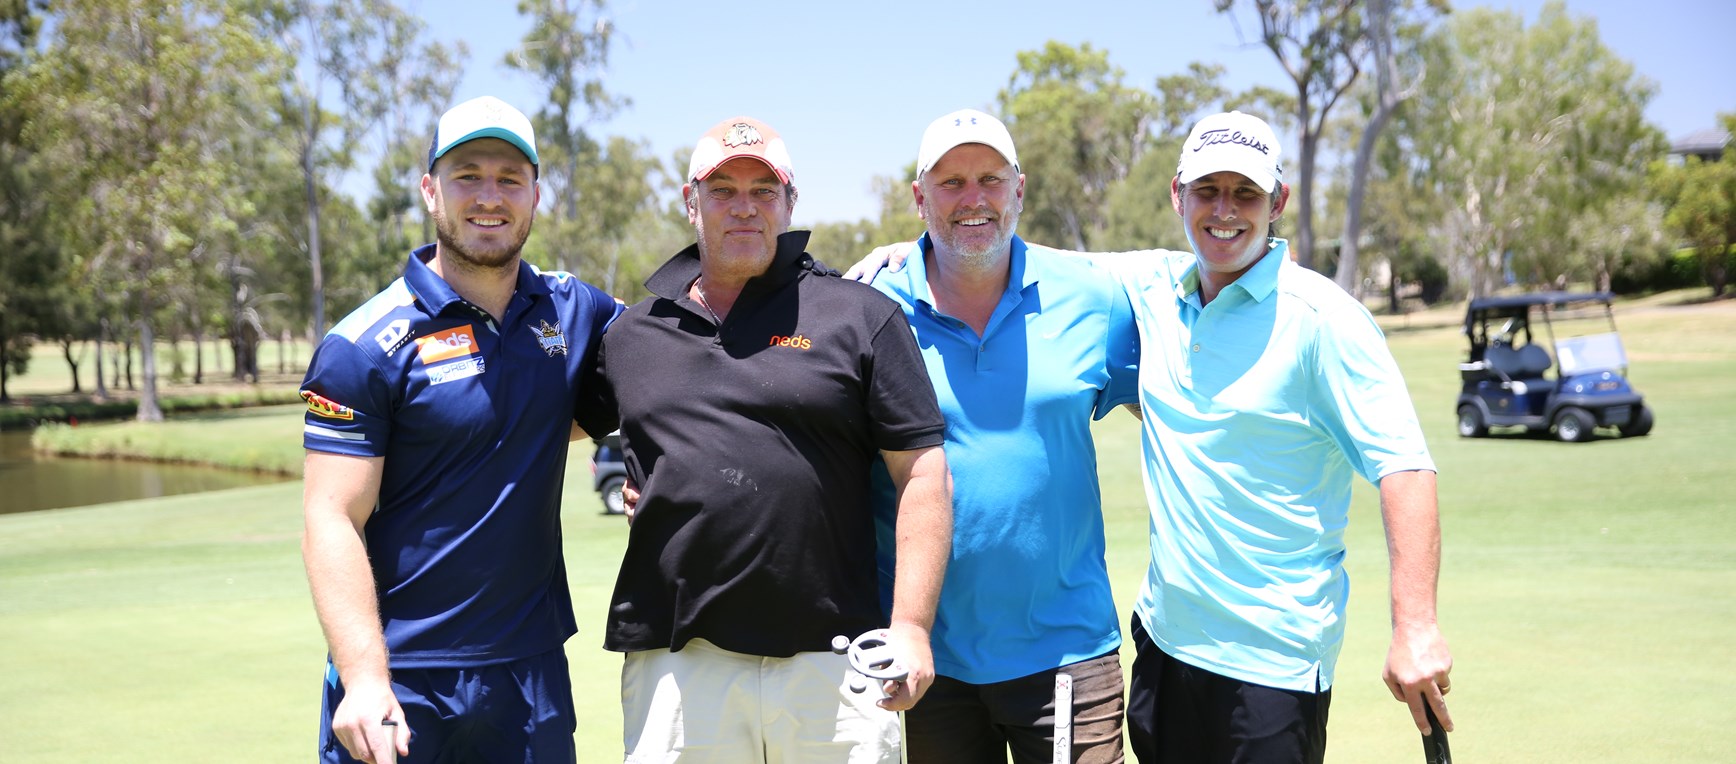 Golf Day in Pictures